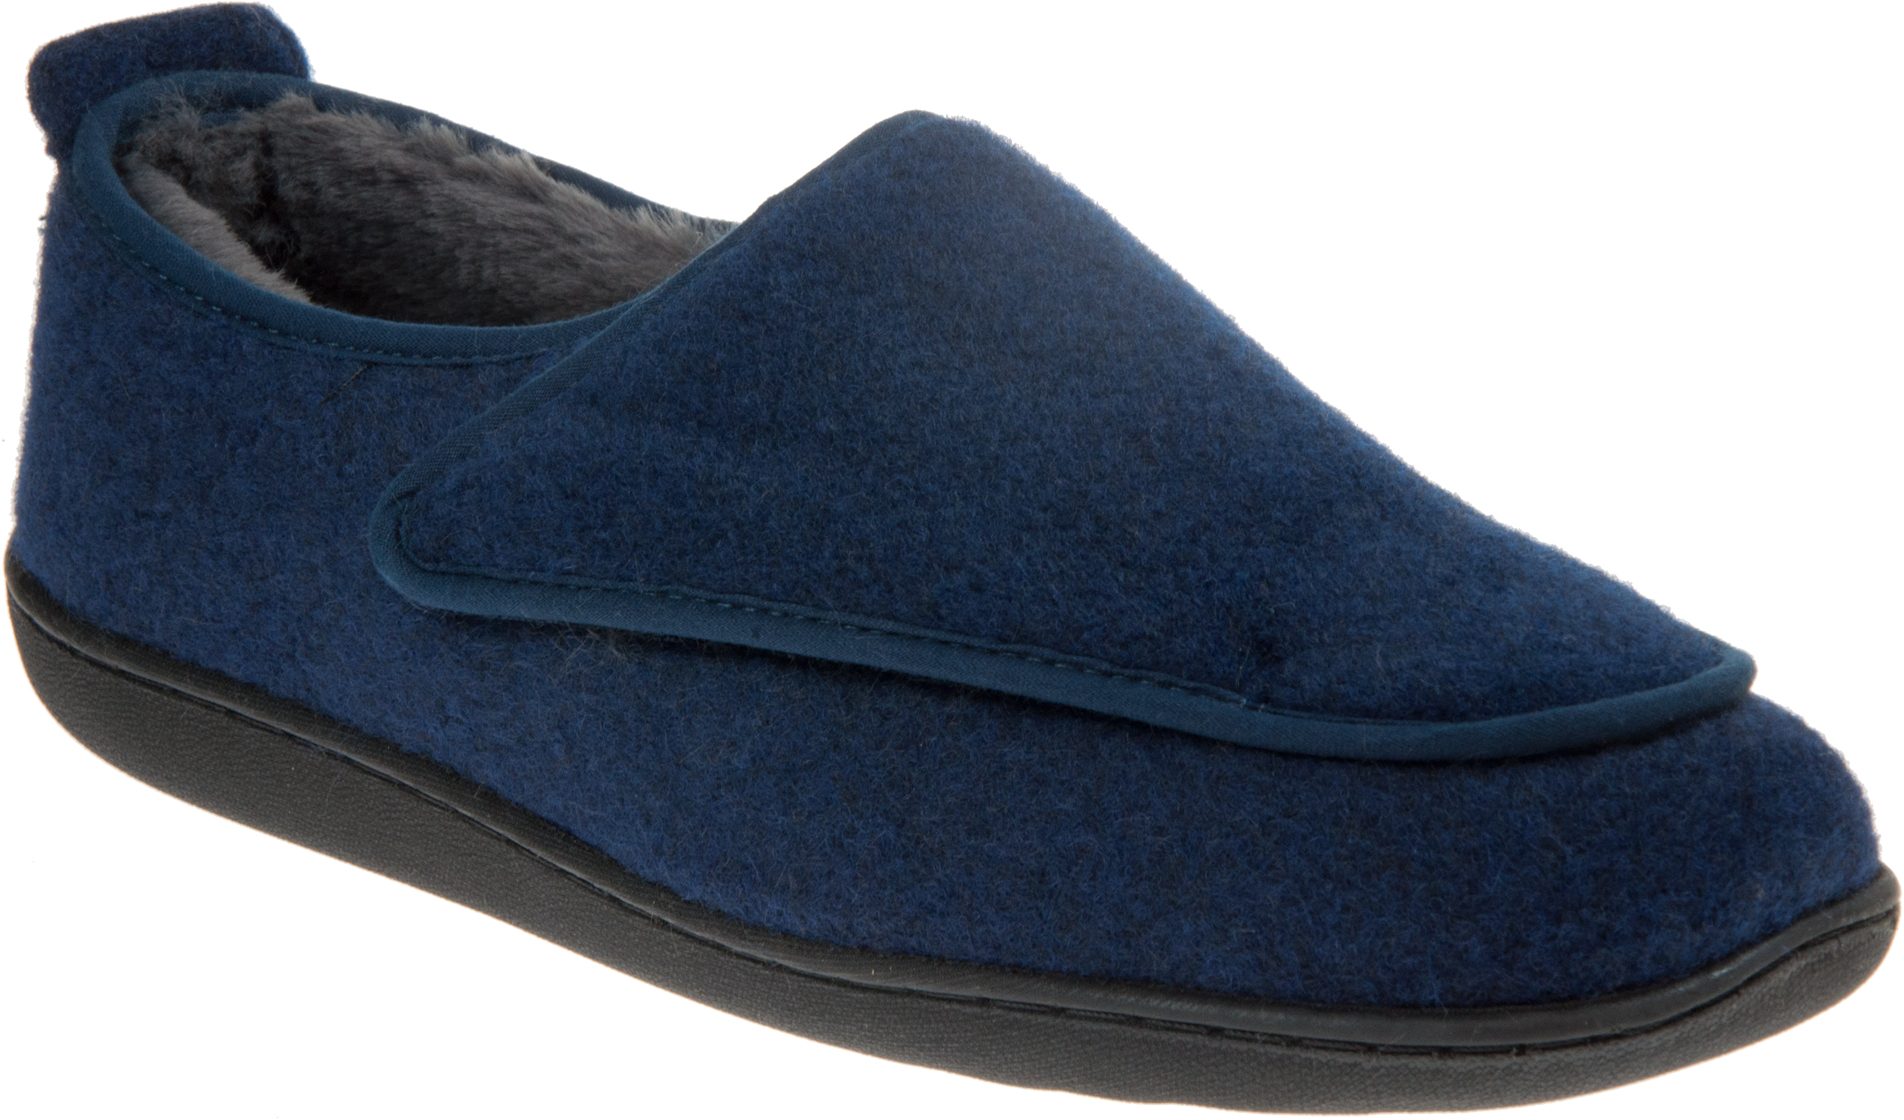 Clarks King Riptape Navy 26164349 - Full Slippers - Humphries Shoes